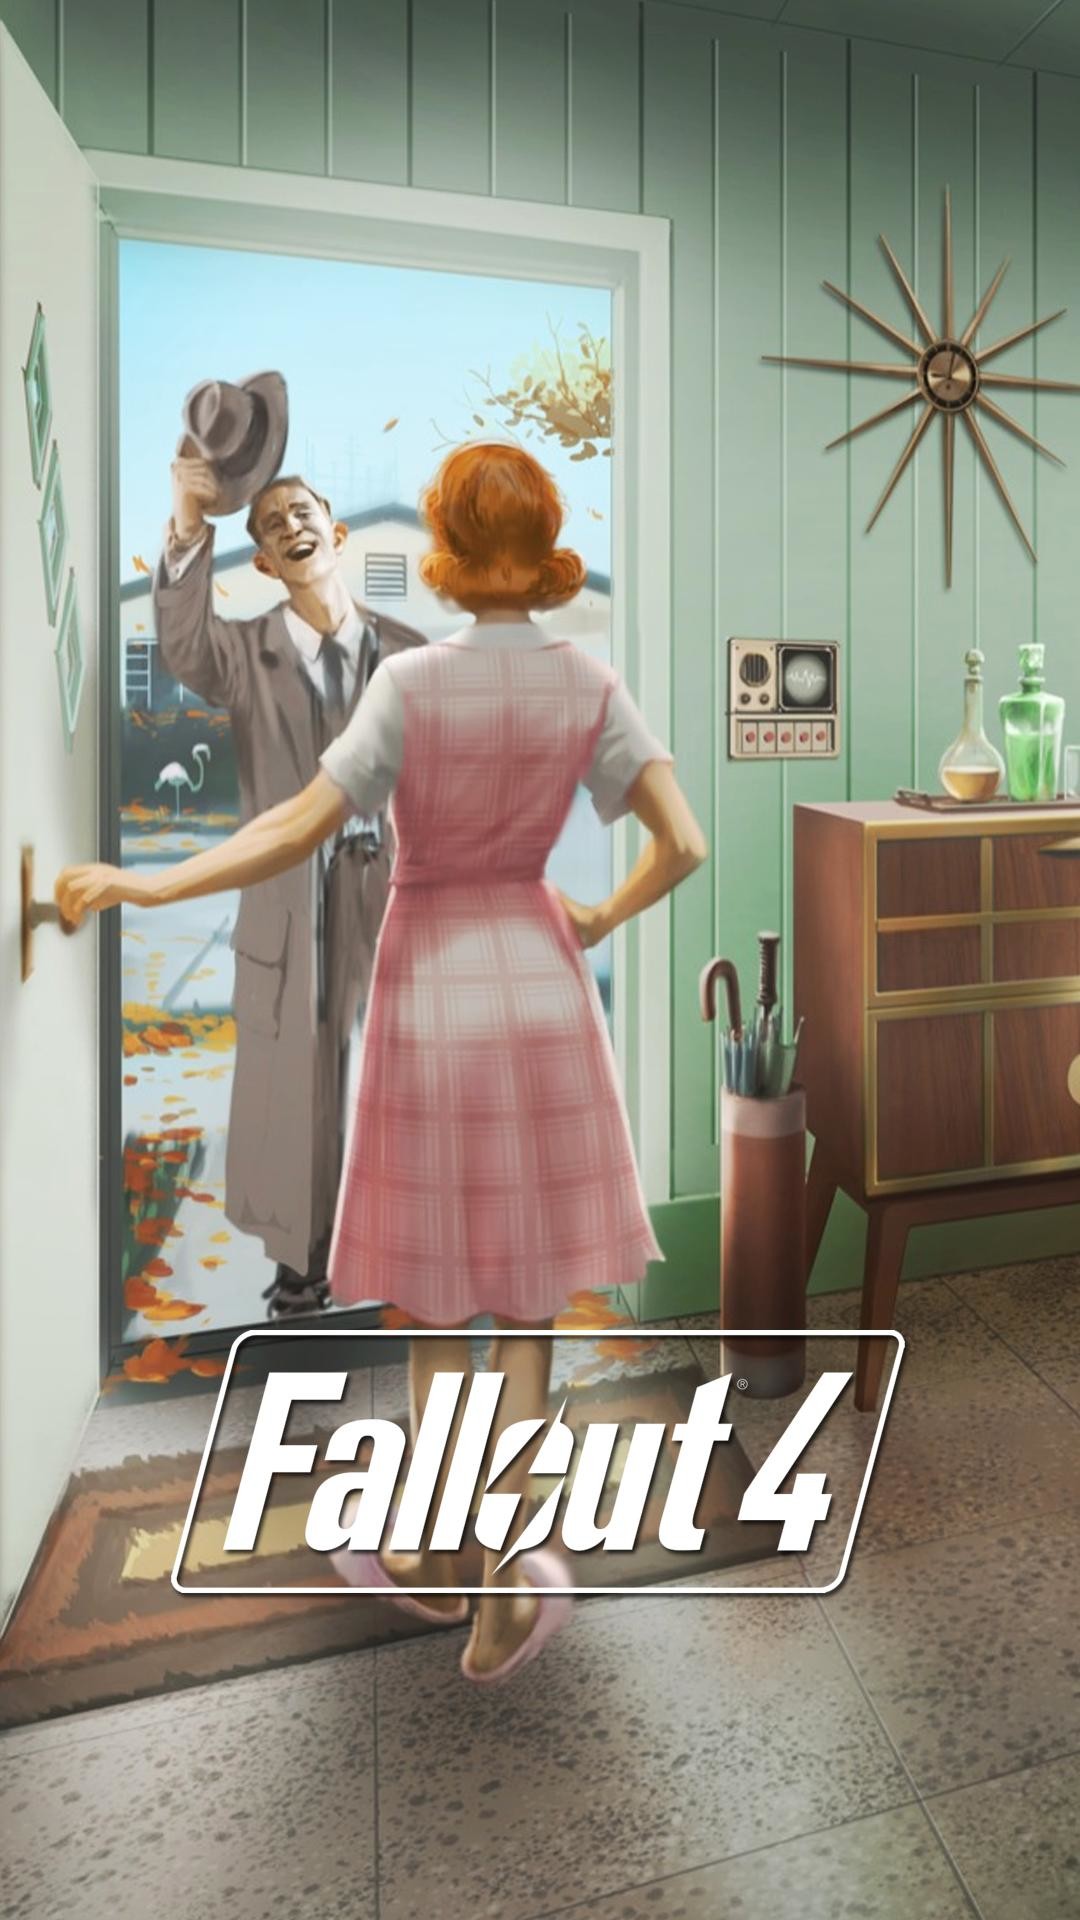 1080x1920 I made some Fallout 4 lock screen wallpapers from E3 stills - Album on Imgur